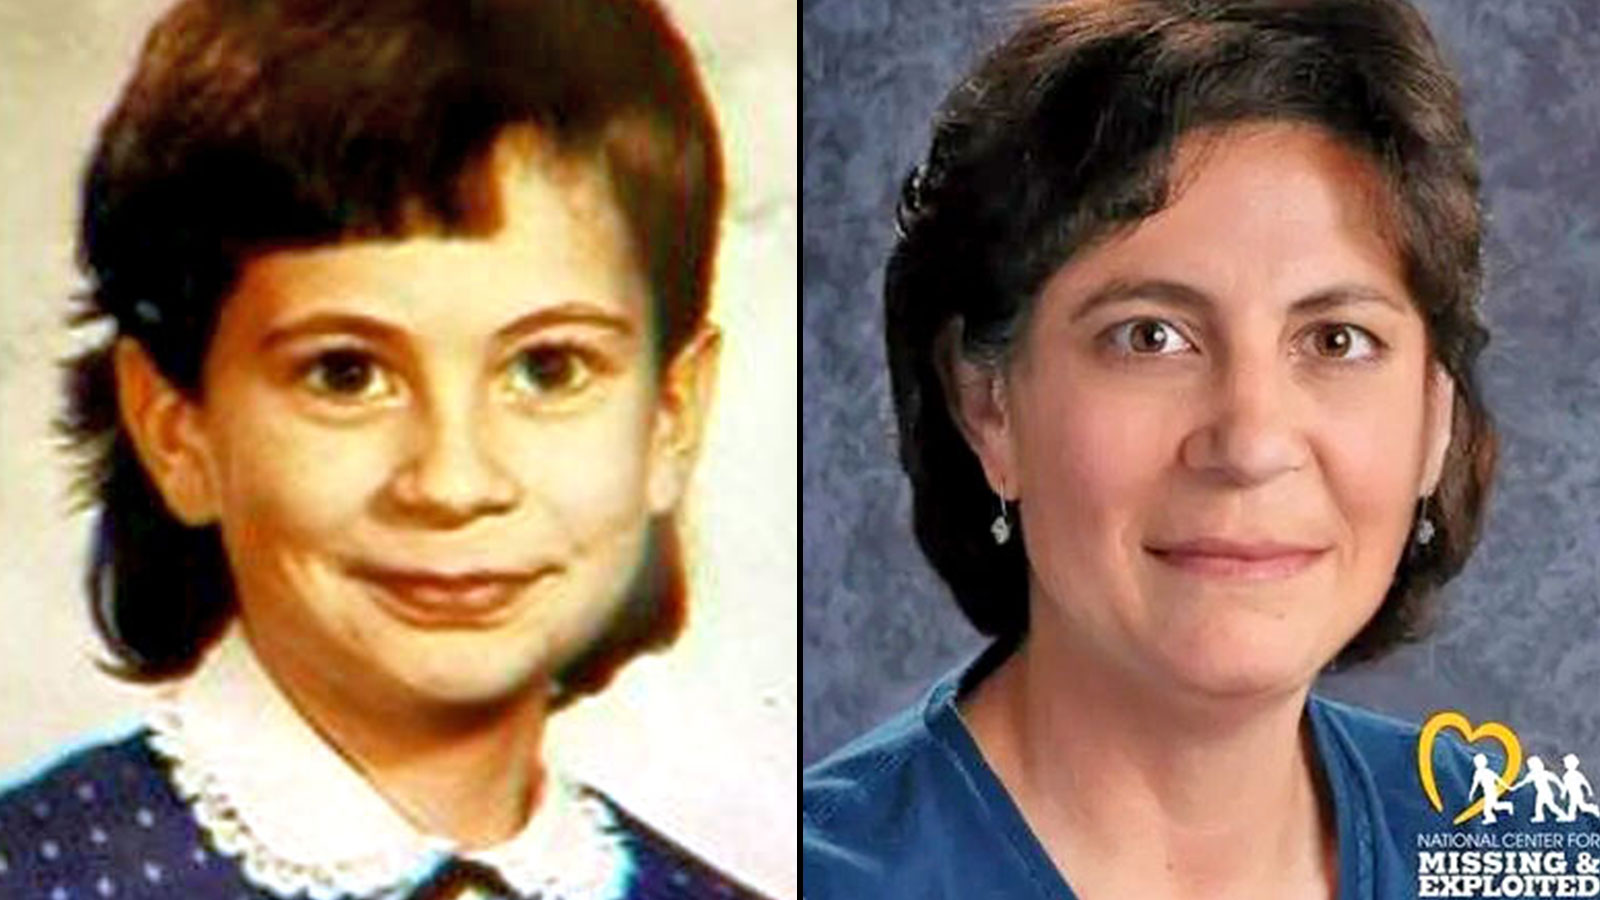 Cherrie Mahan, aged eight, and an age progression image of how she would look now, aged 46